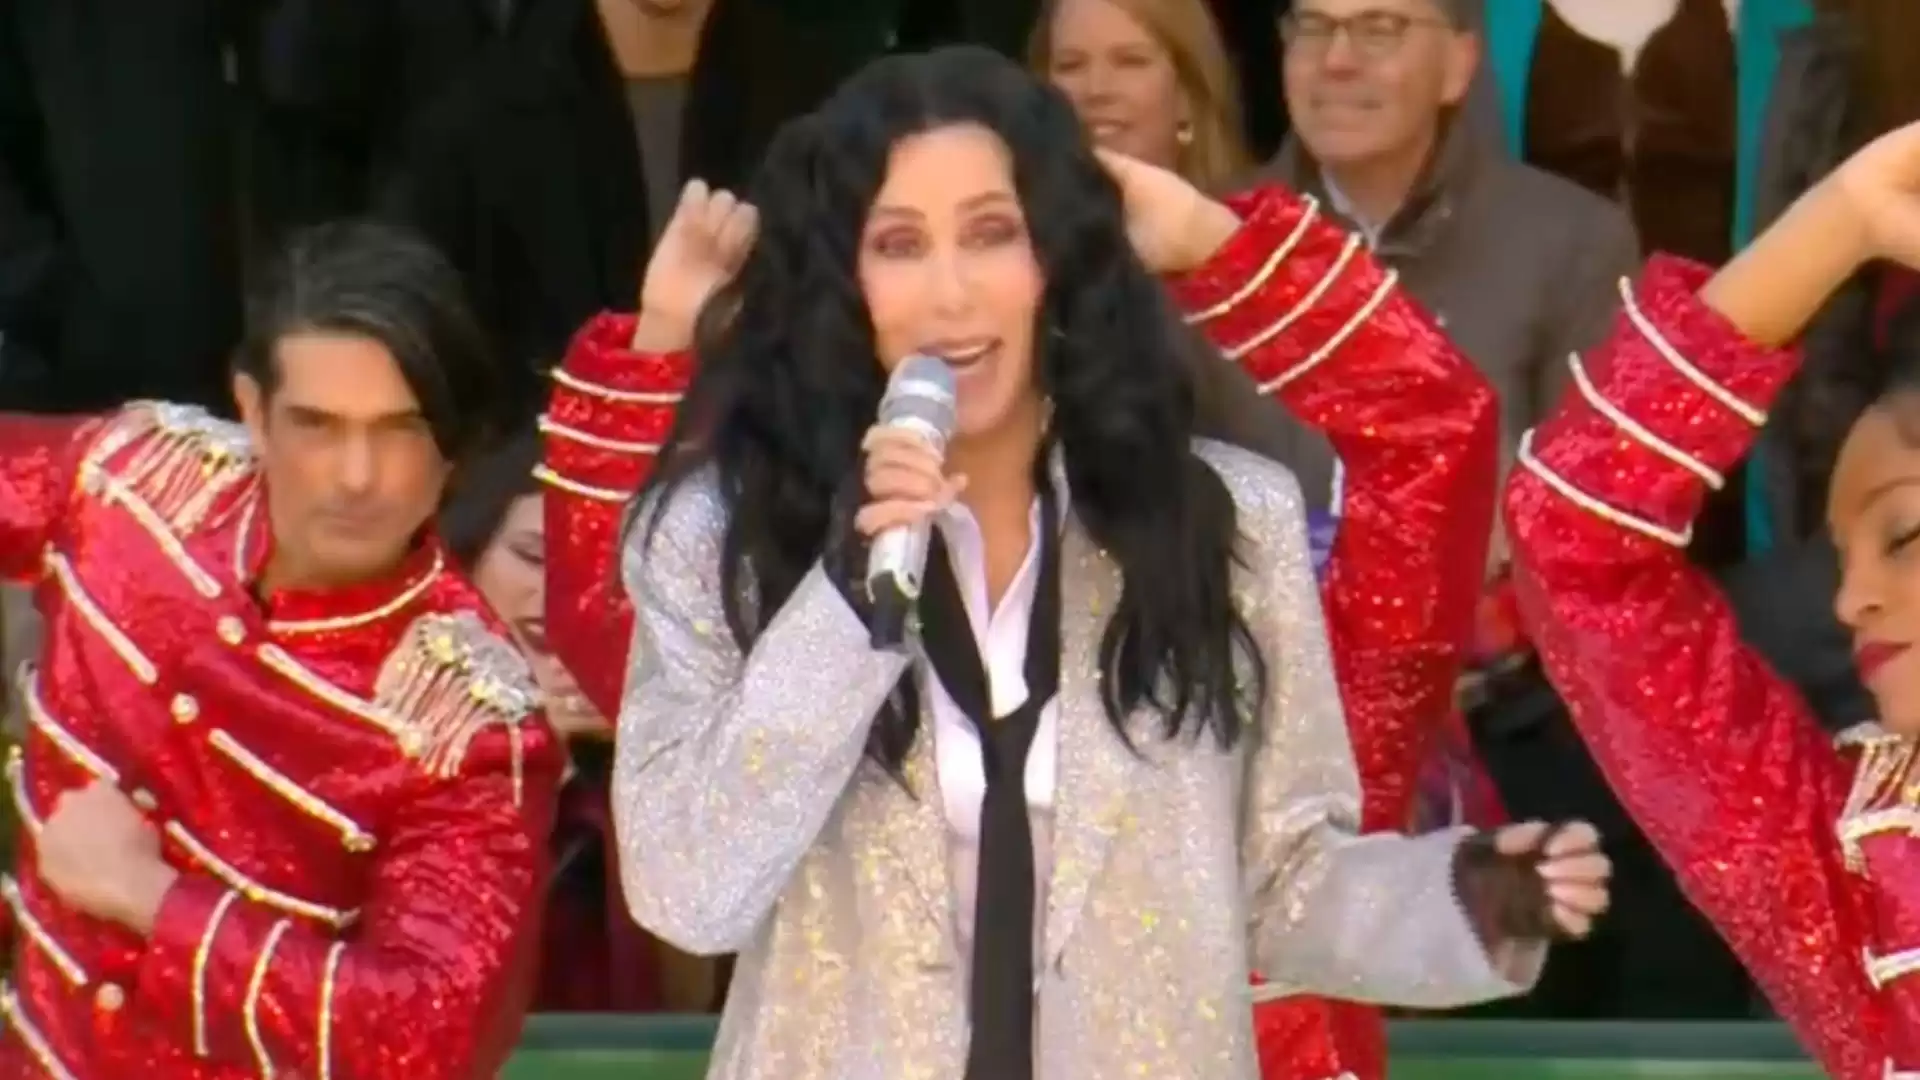 Cher criticized for lip syncing at Macy's Thanksgiving Day Parade